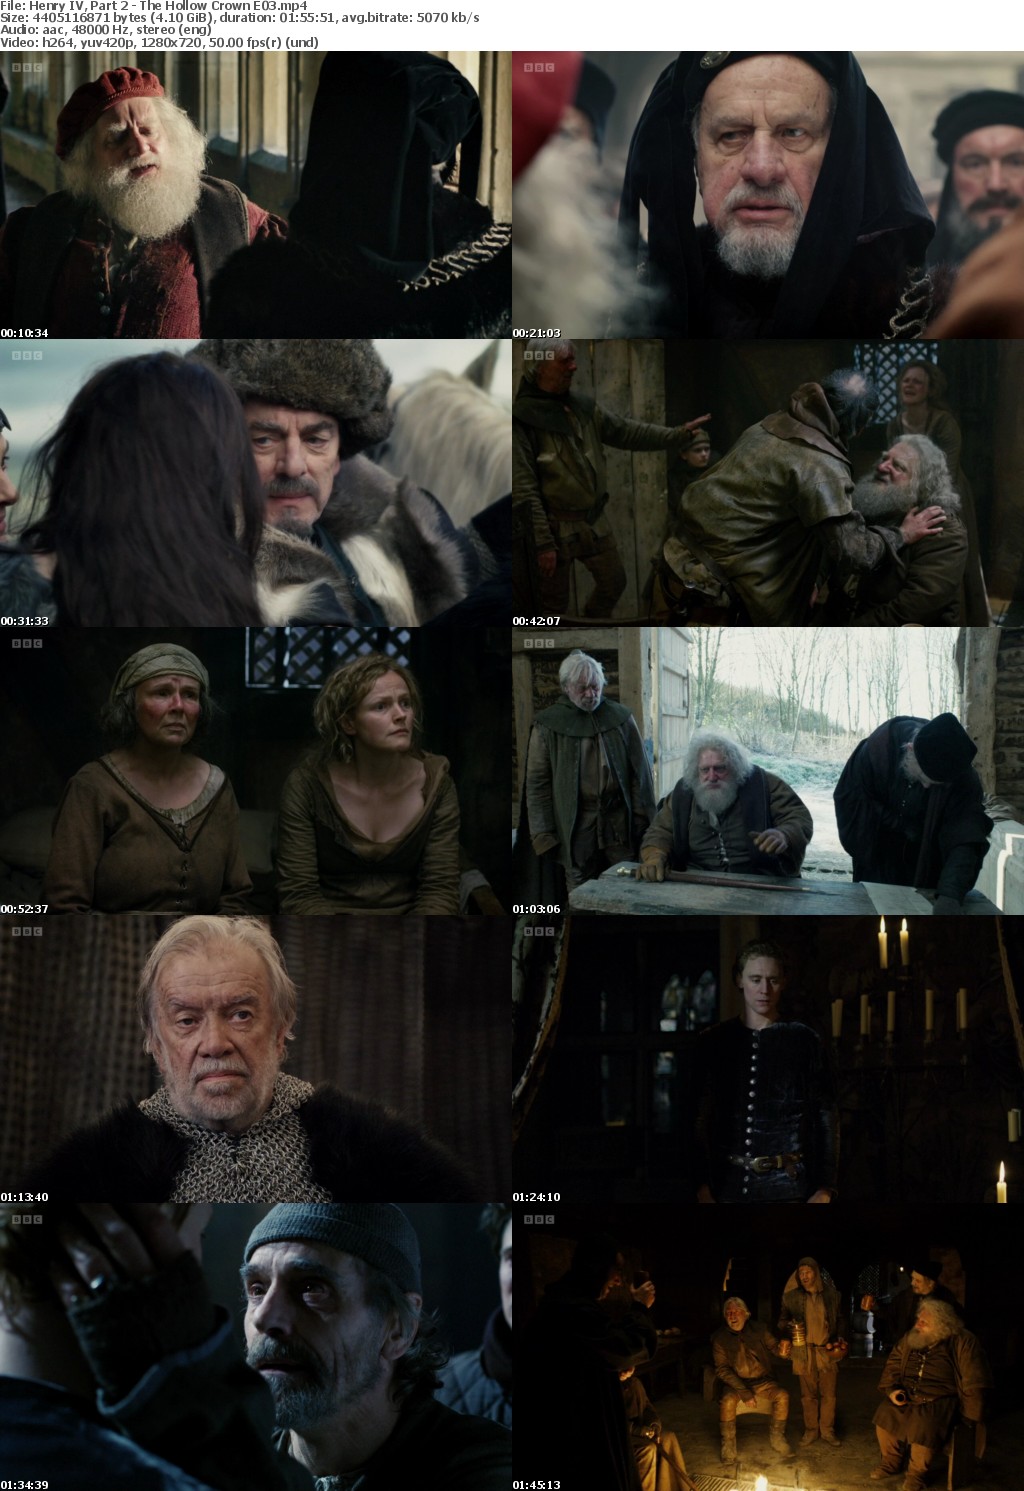 Henry IV, Part 2 - The Hollow Crown E03 (Irons, Hiddlestone, Beale) (1280x720p HD, 50fps, soft Eng subs)